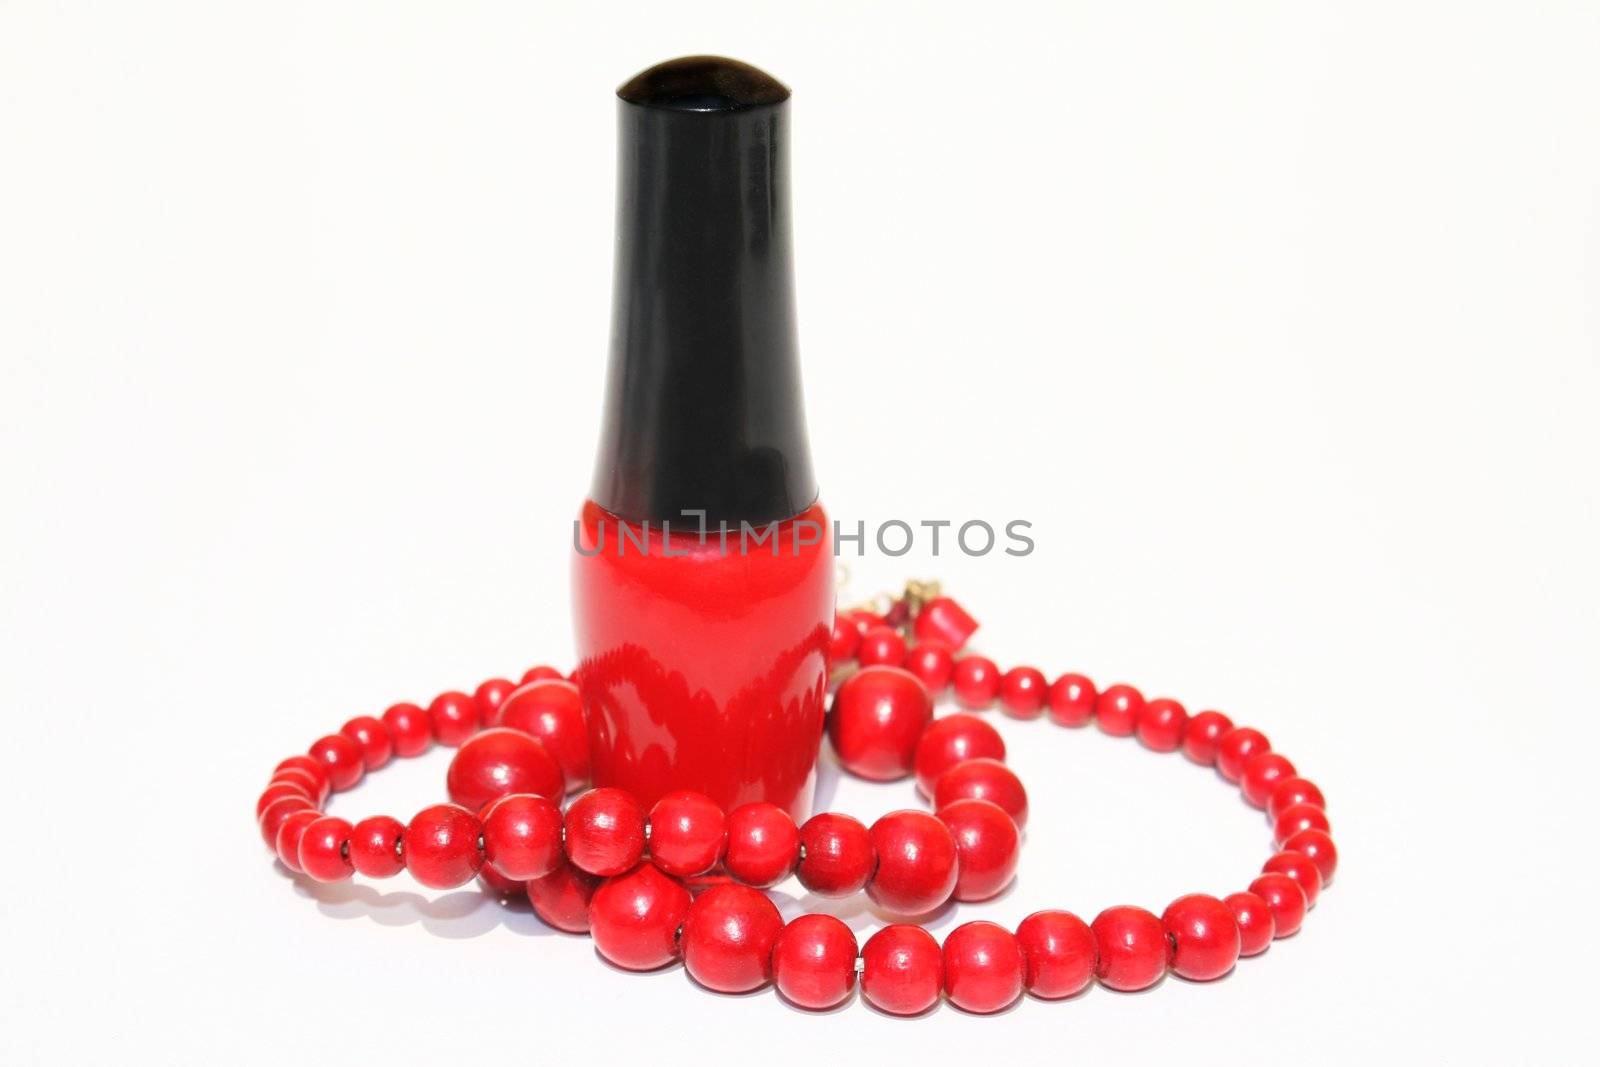 Nail polish and necklace by timscottrom